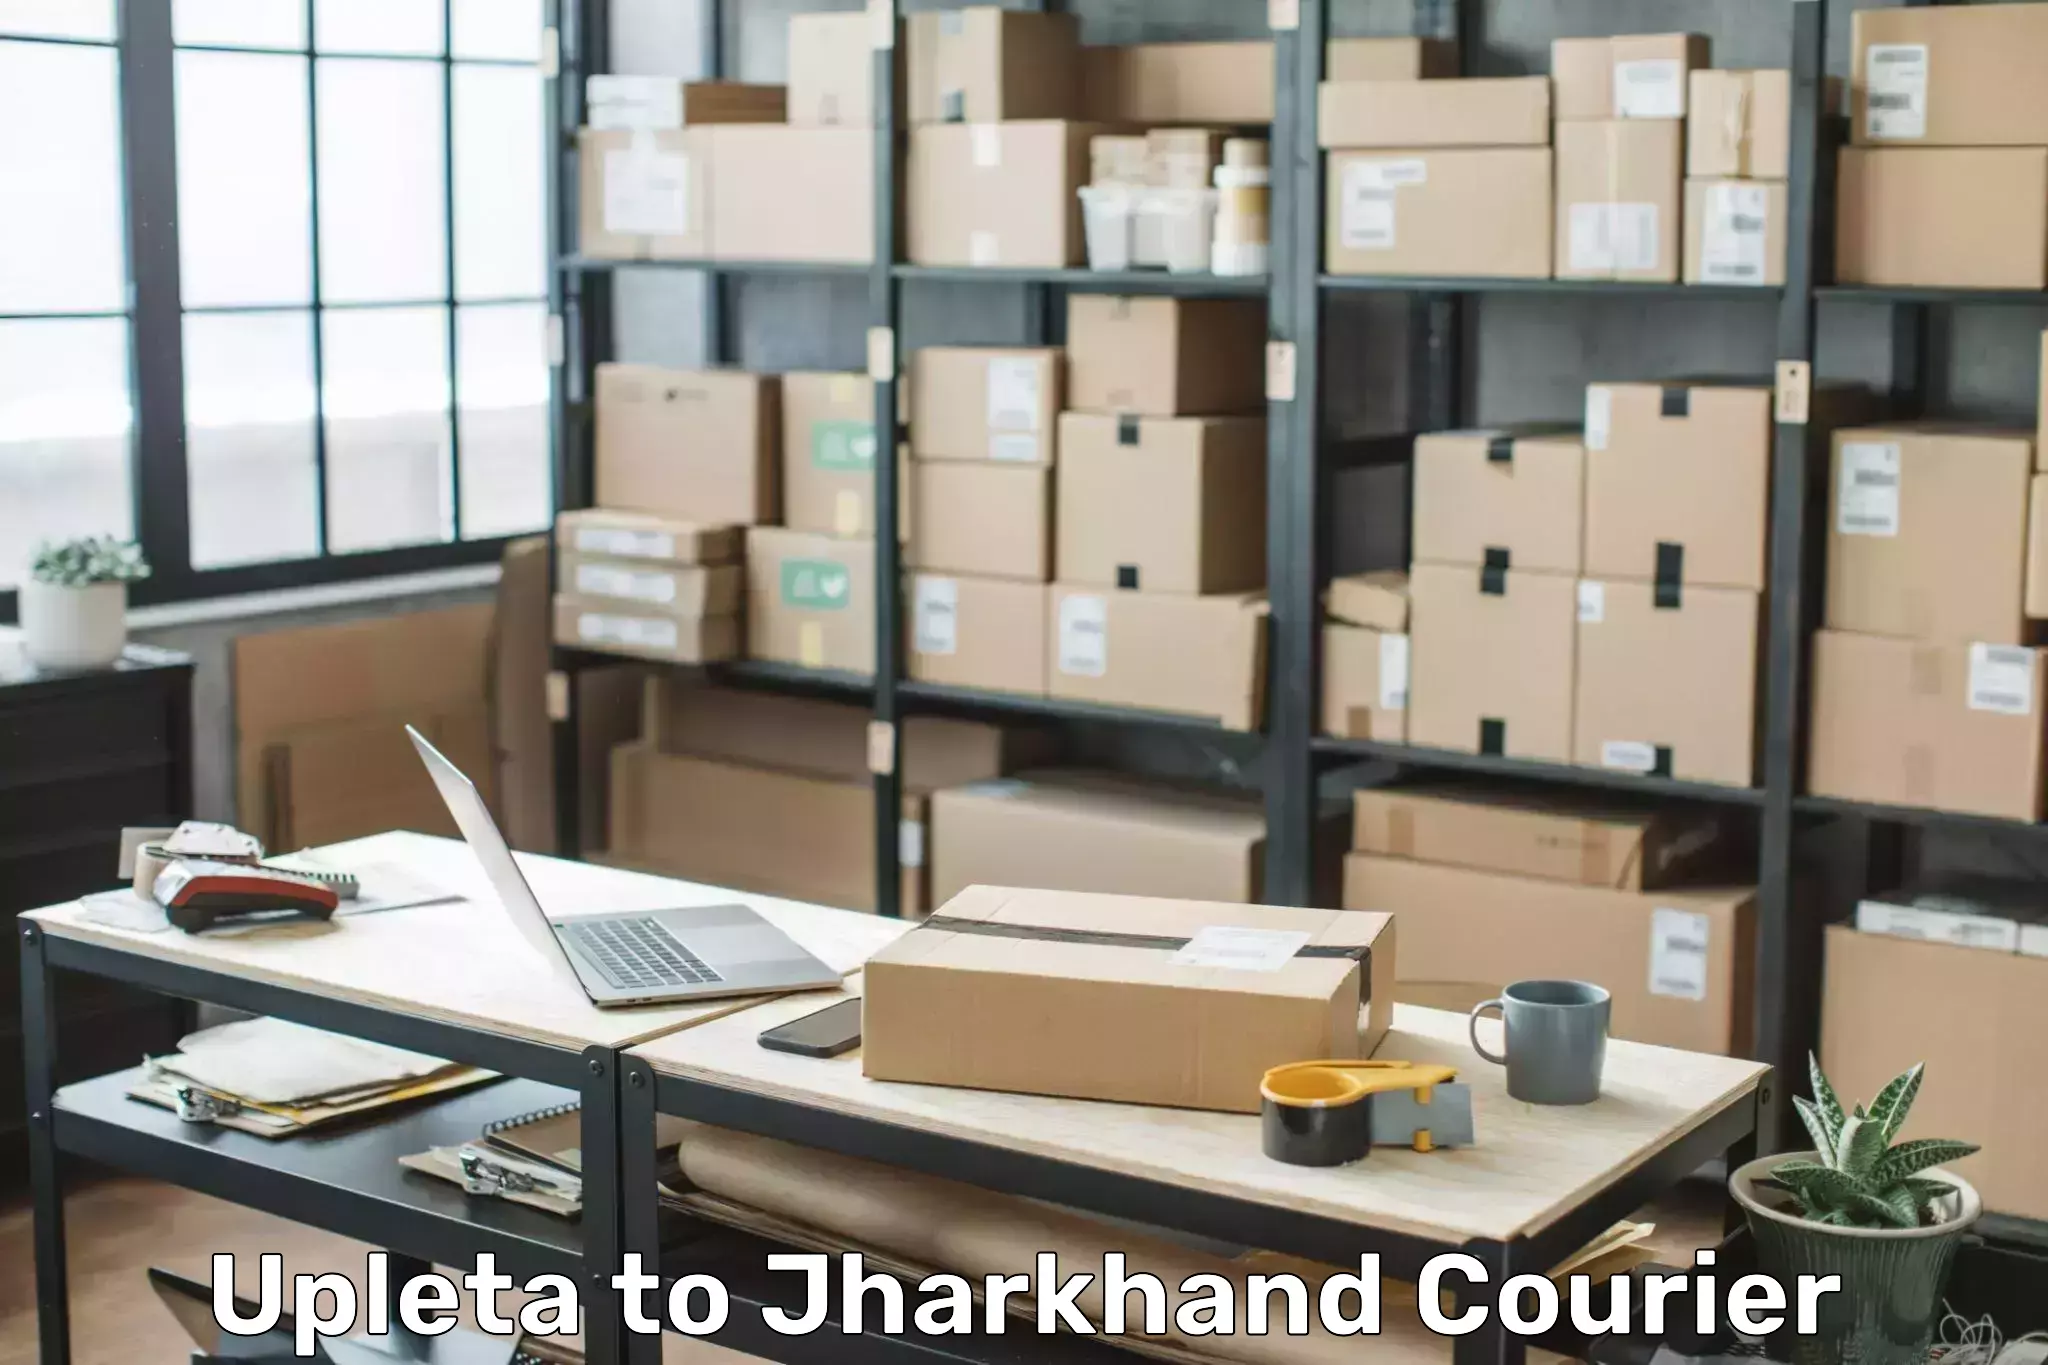 Luggage delivery providers Upleta to Jharkhand